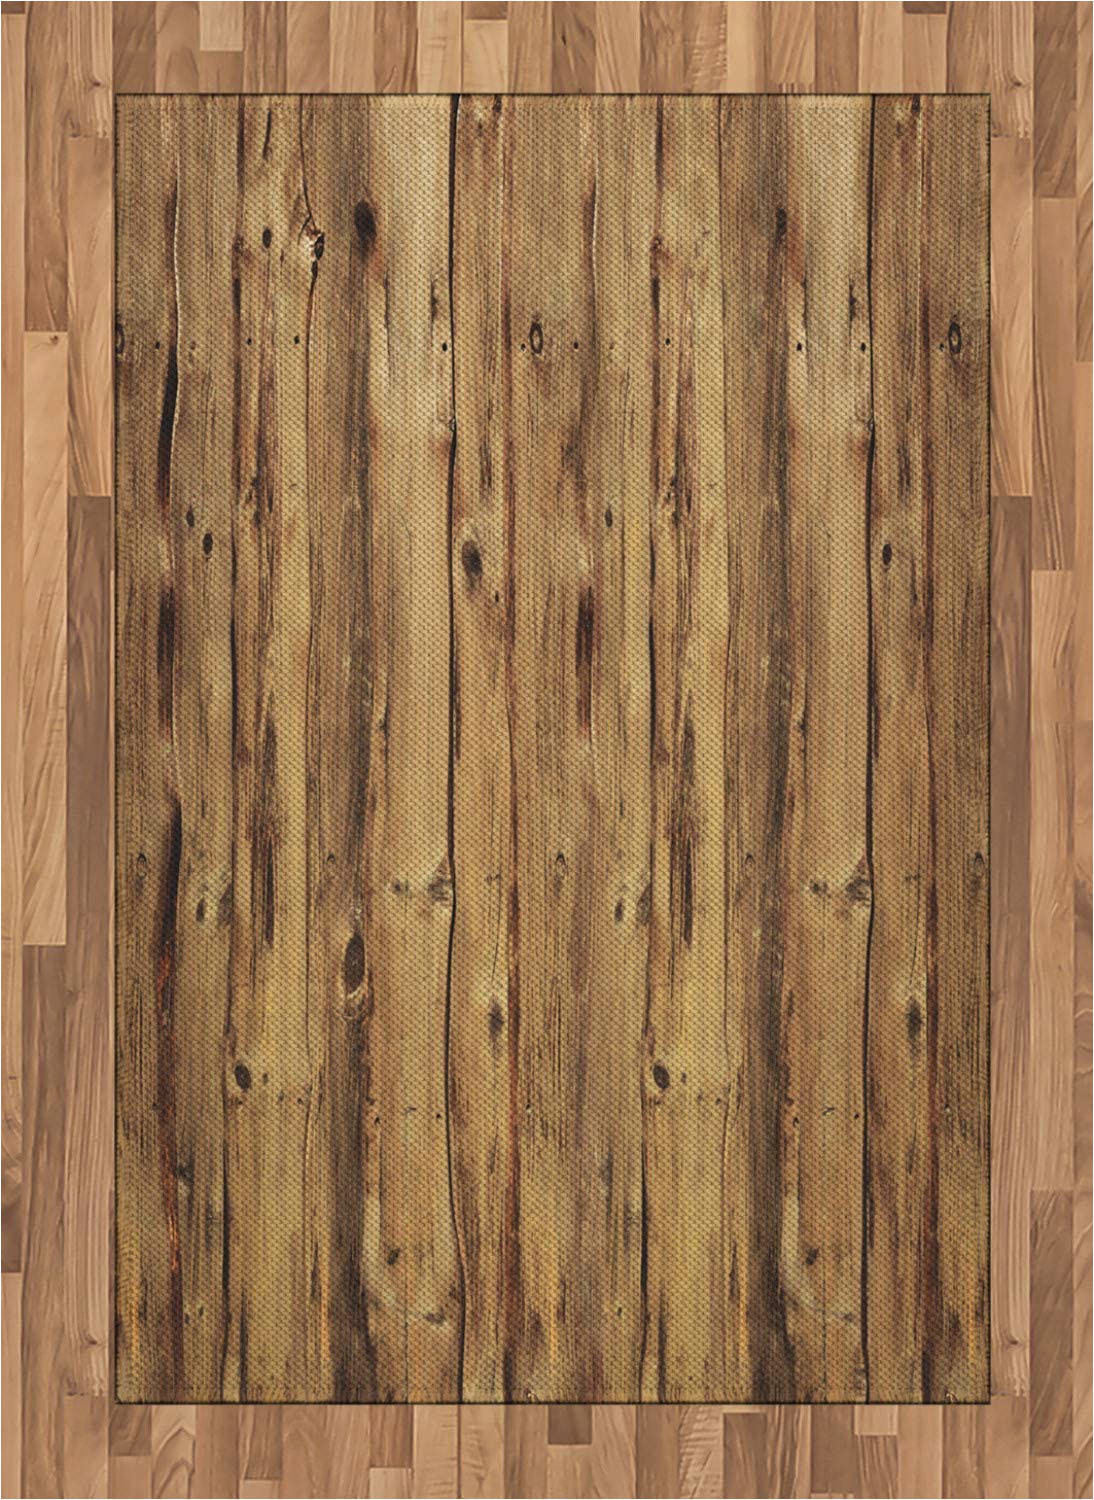 Area Rugs for Wood Laminate Amazon Ambesonne Rustic area Rug Wooden Texture Image